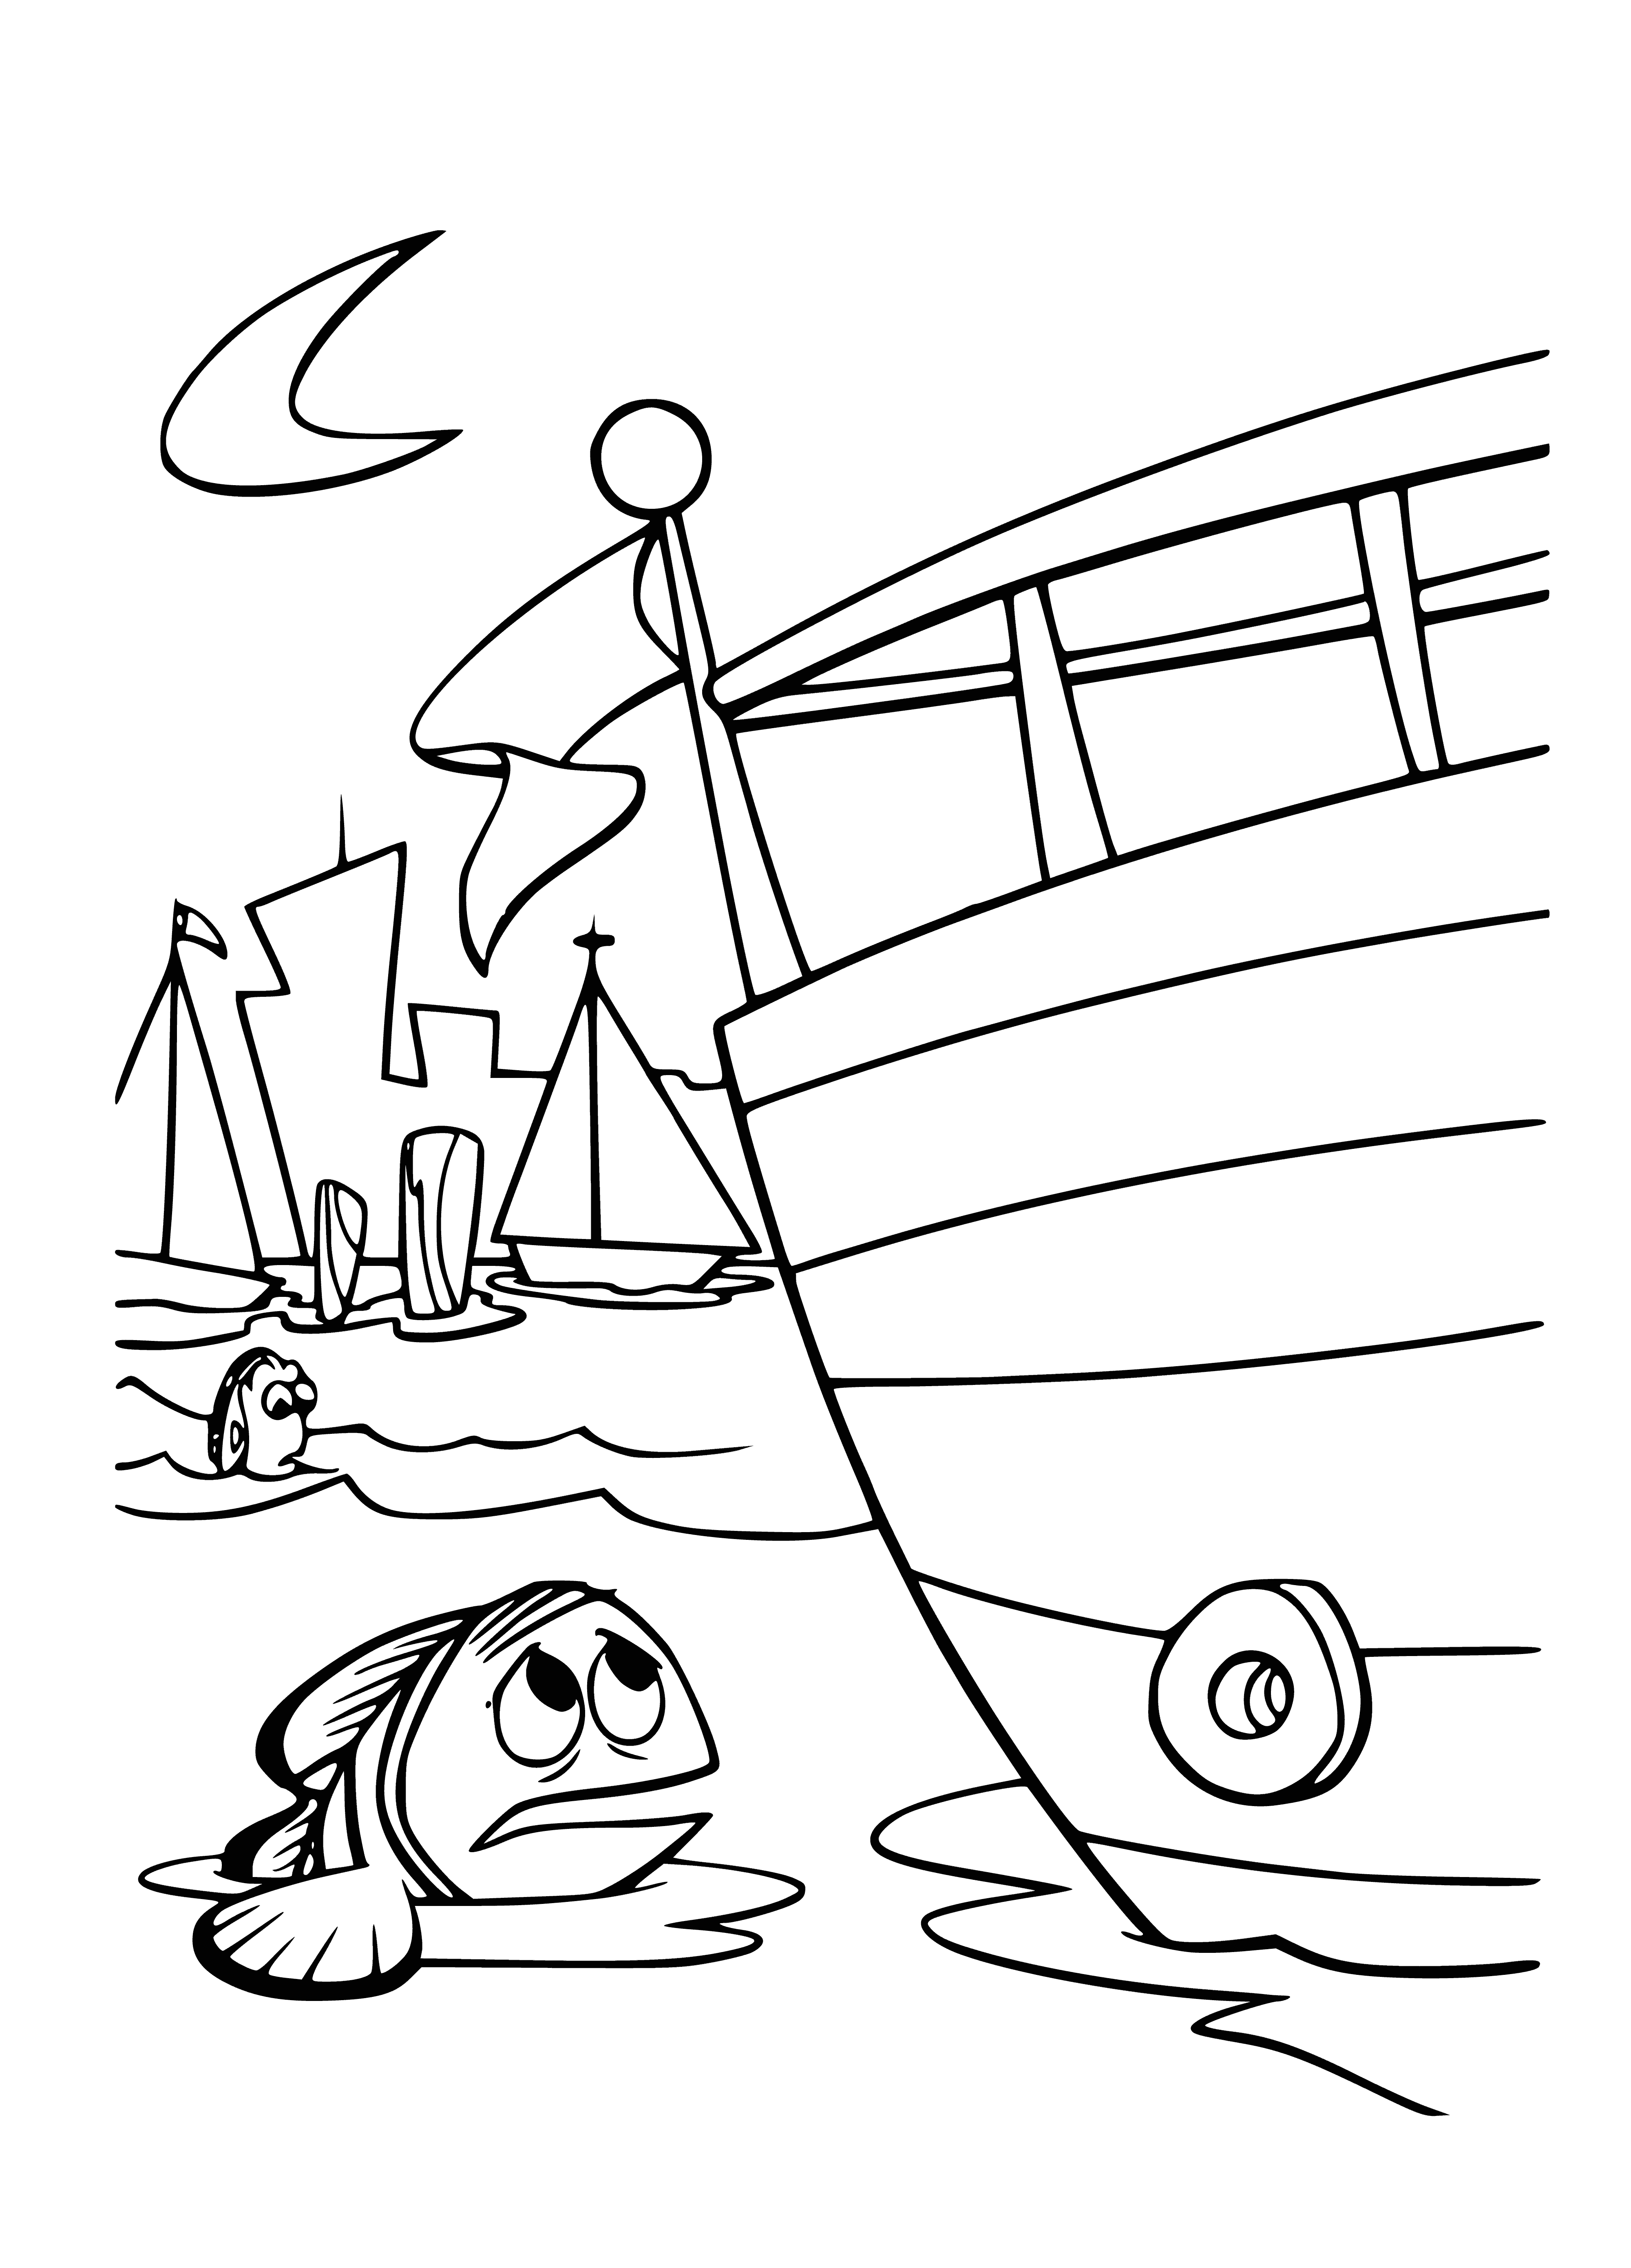 coloring page: Coloring page shows boats in choppy waters with a brewing storm. Clouds filling the sky. #paintingskills